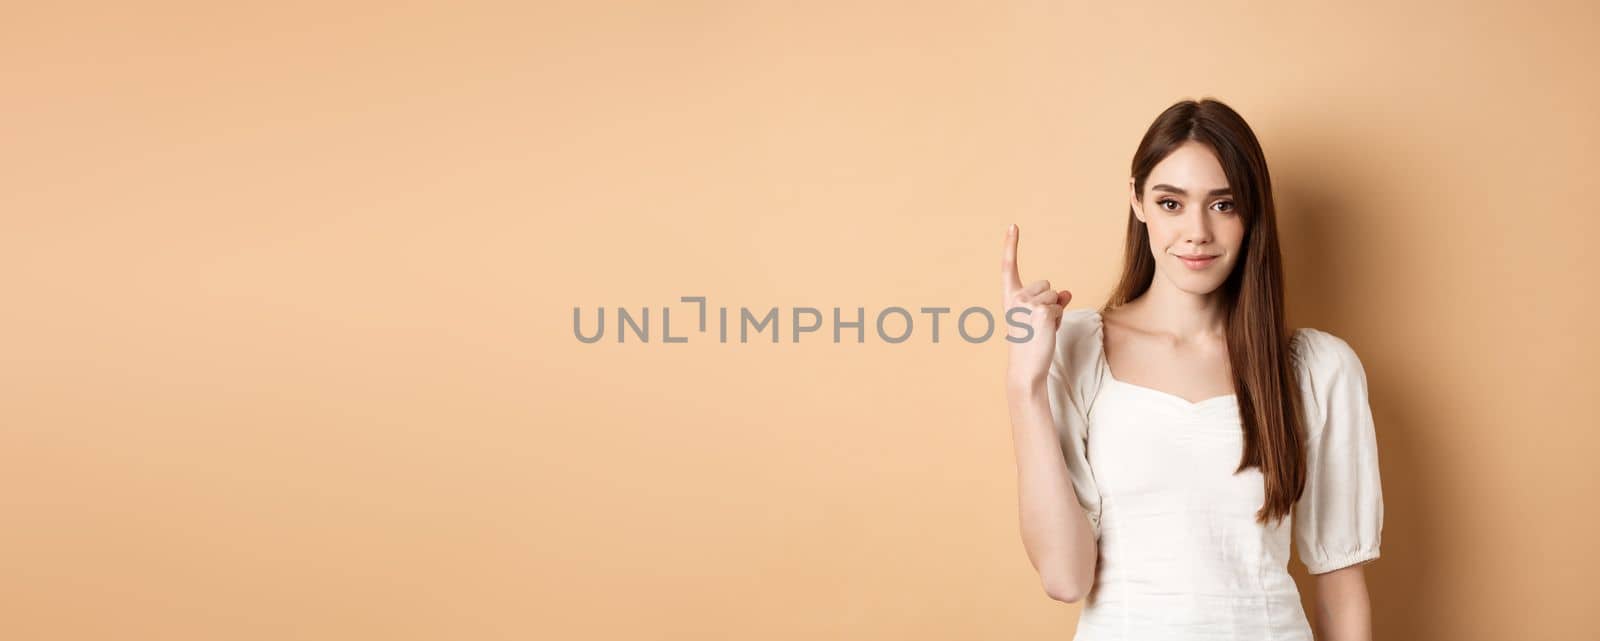 Attractive young woman show finger number one, smiling and looking confident, standing on beige background.